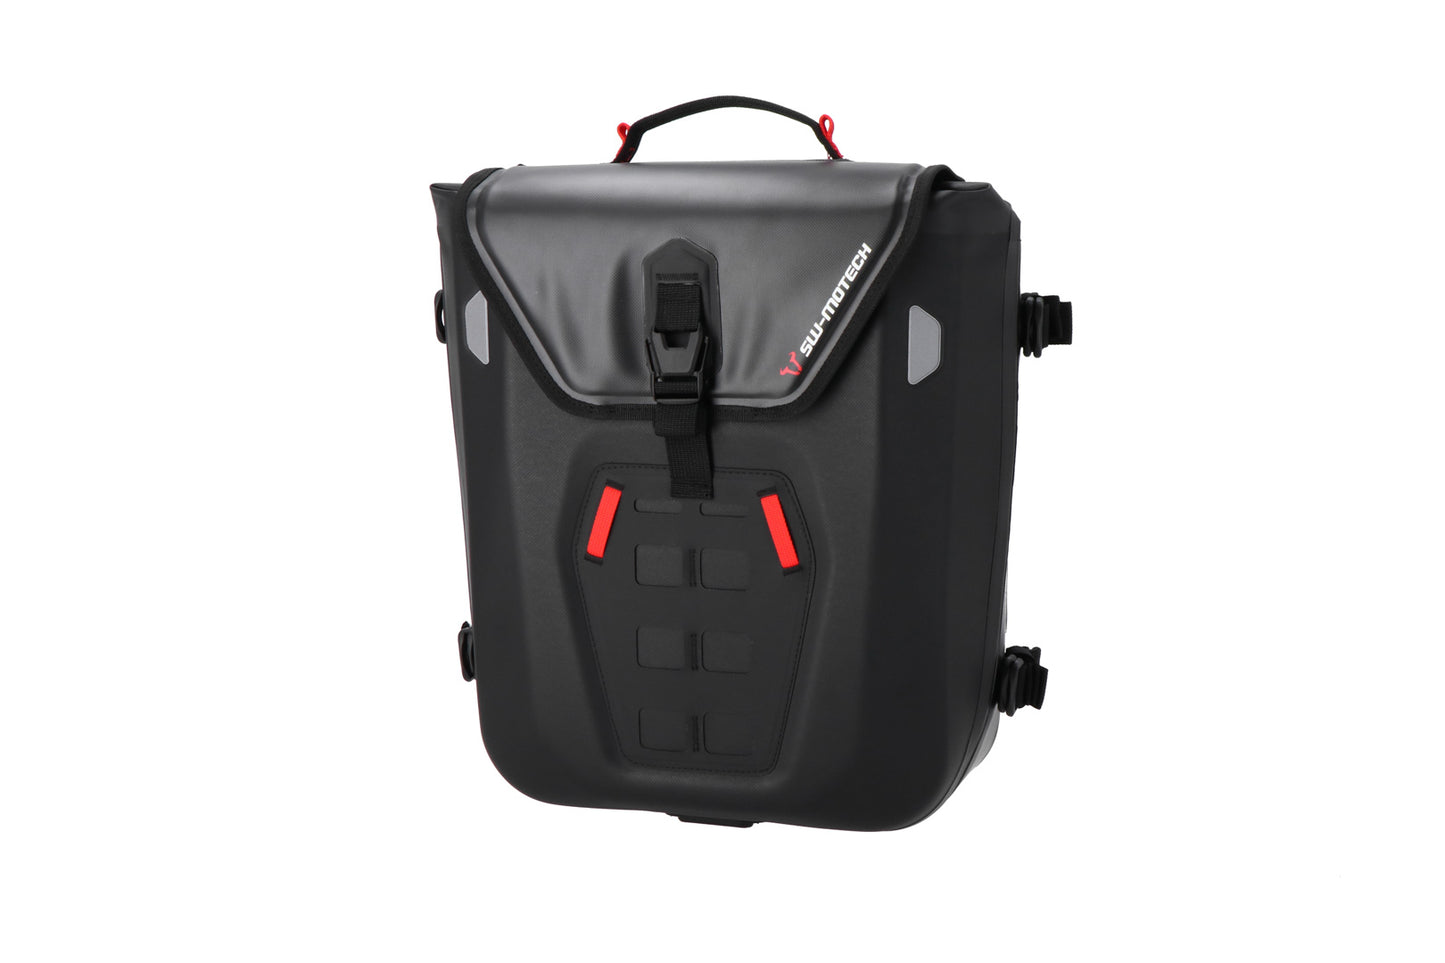 SW Motech SysBag WP M with right adapter plate